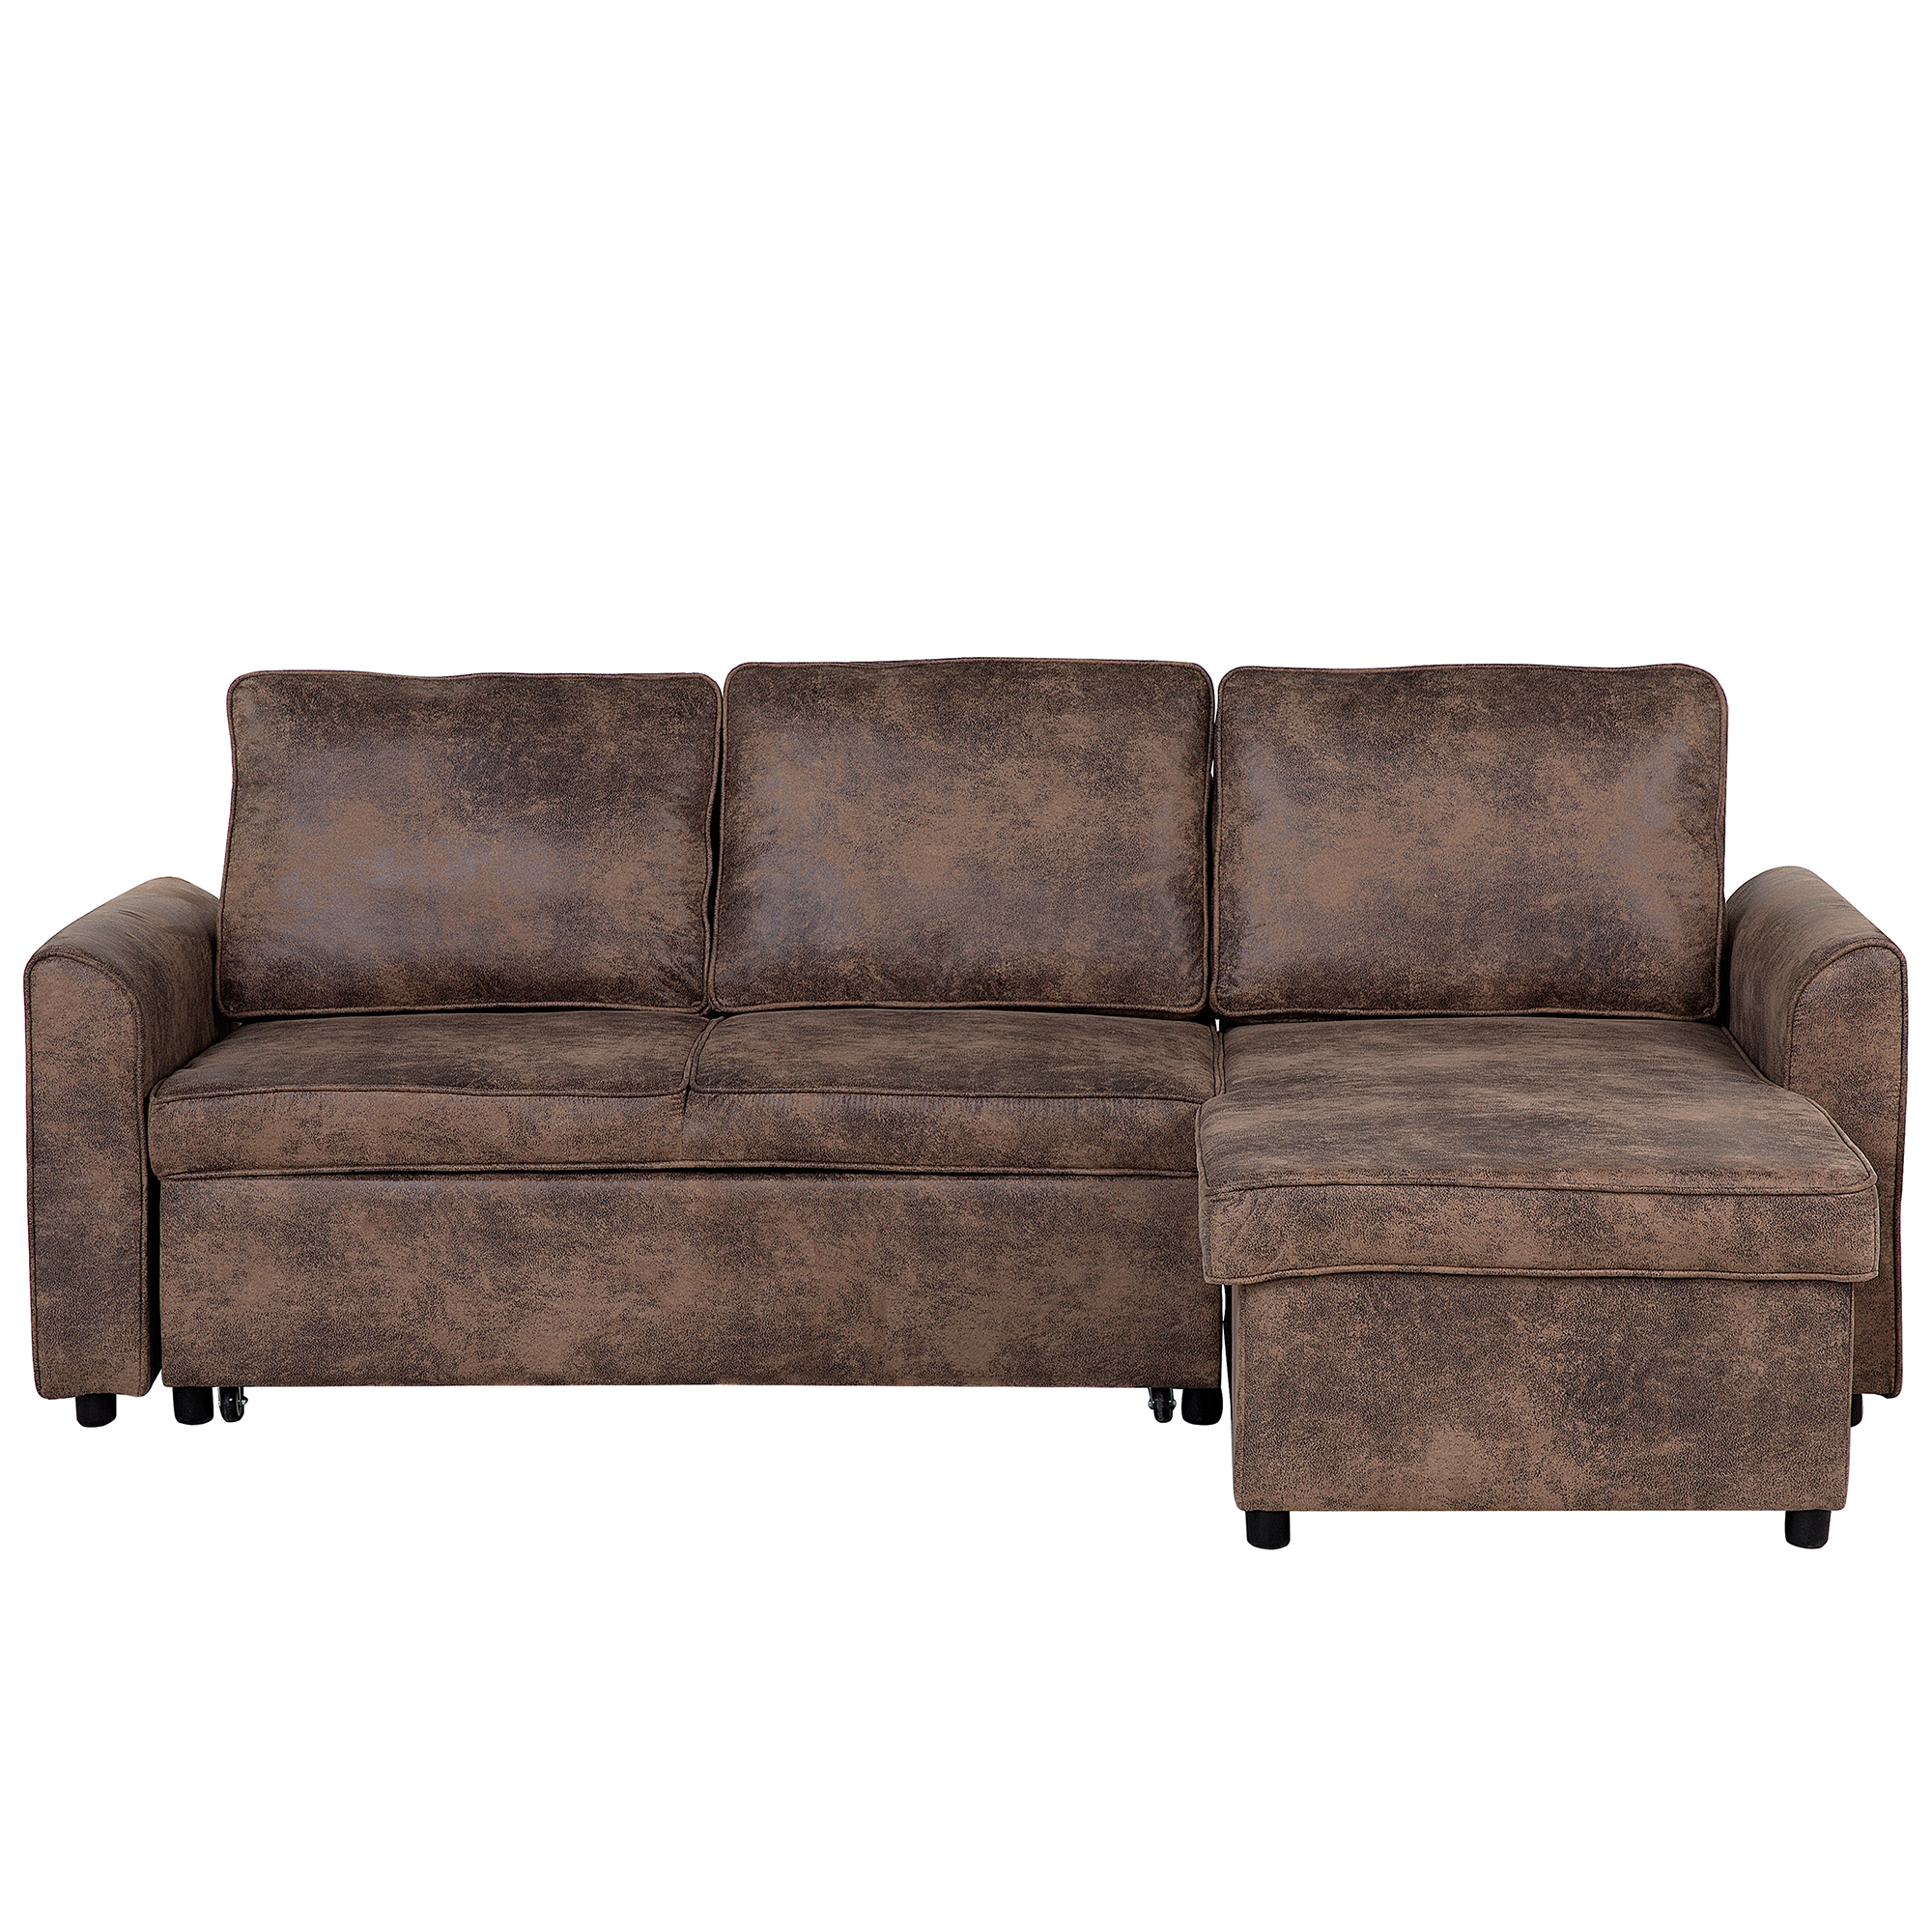 Beliani Corner Sofa Bed Brown Faux Leather Upholstered Left Hand Orientation with Storage Bed